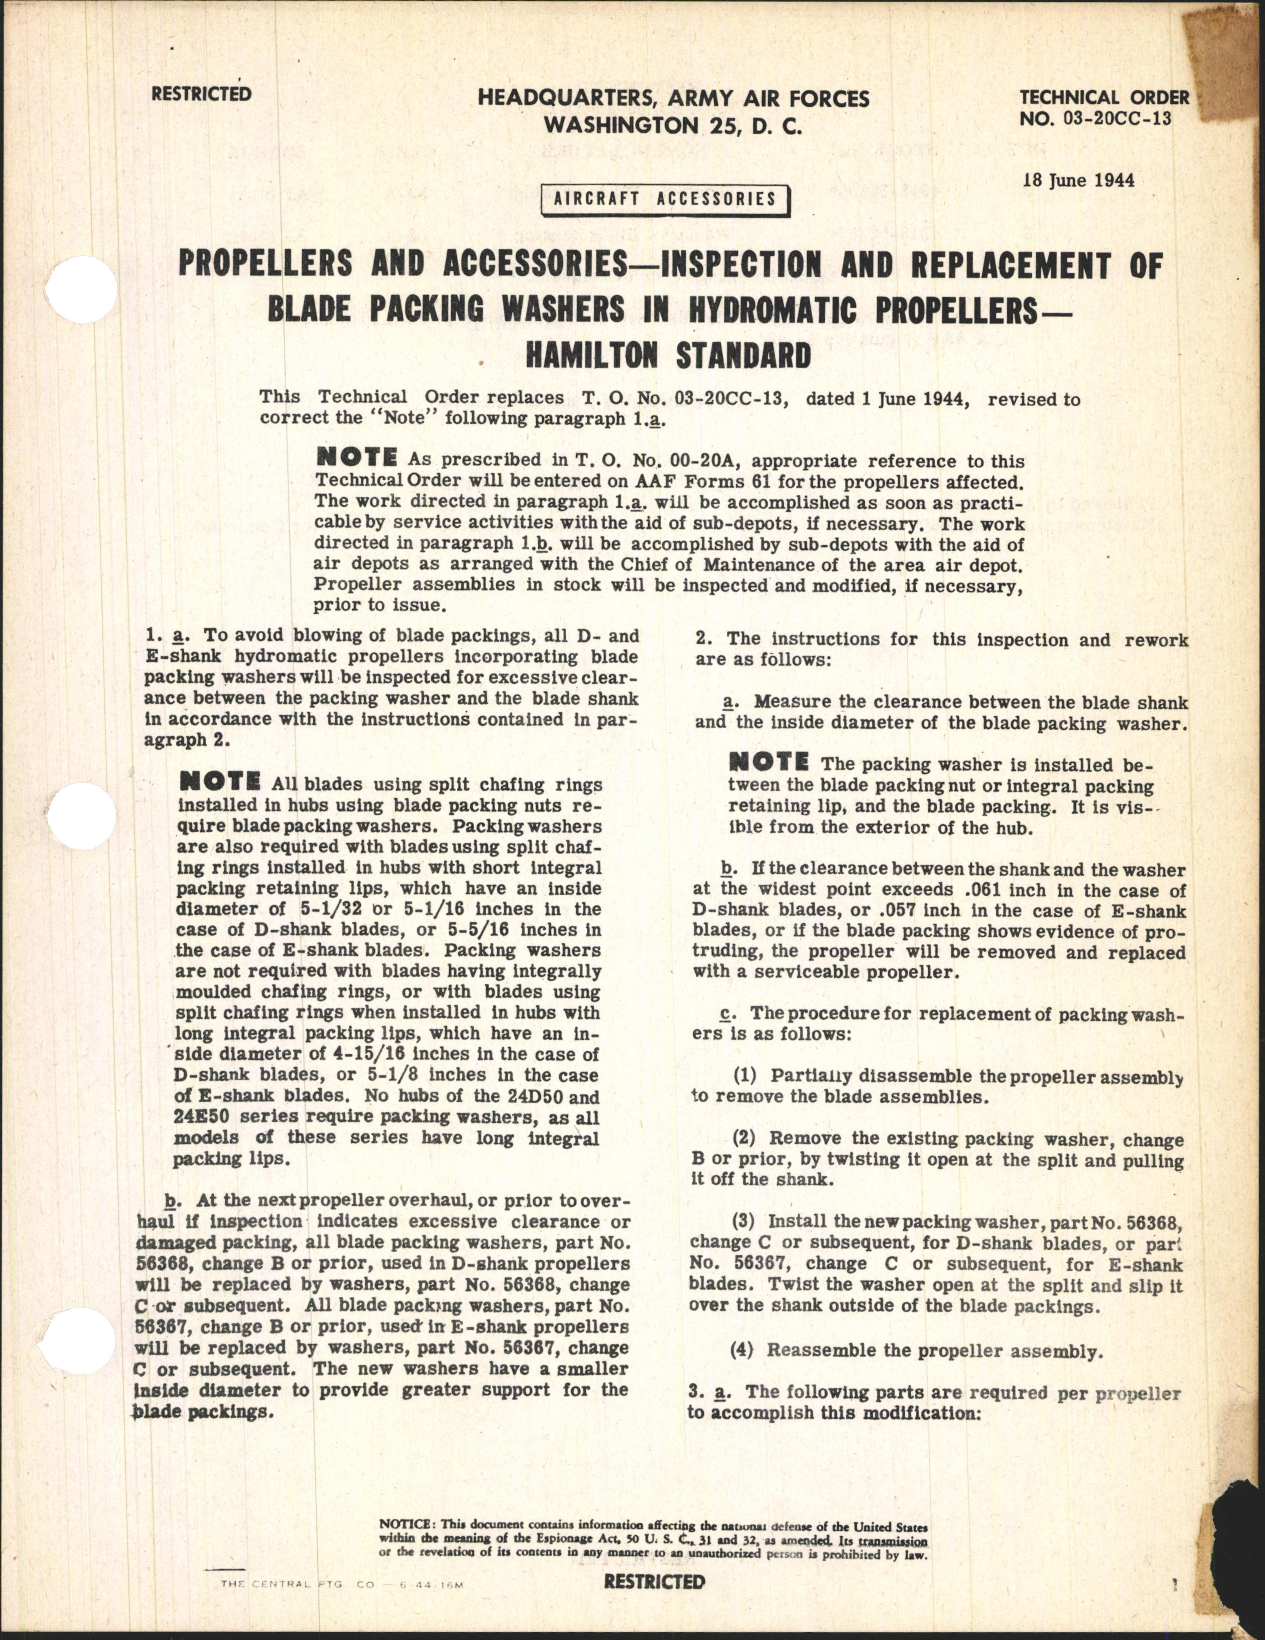 Sample page 1 from AirCorps Library document: Inspection & Replacement of Blade Packing Washers in Hydromatic Propellers - Hamilton Standard